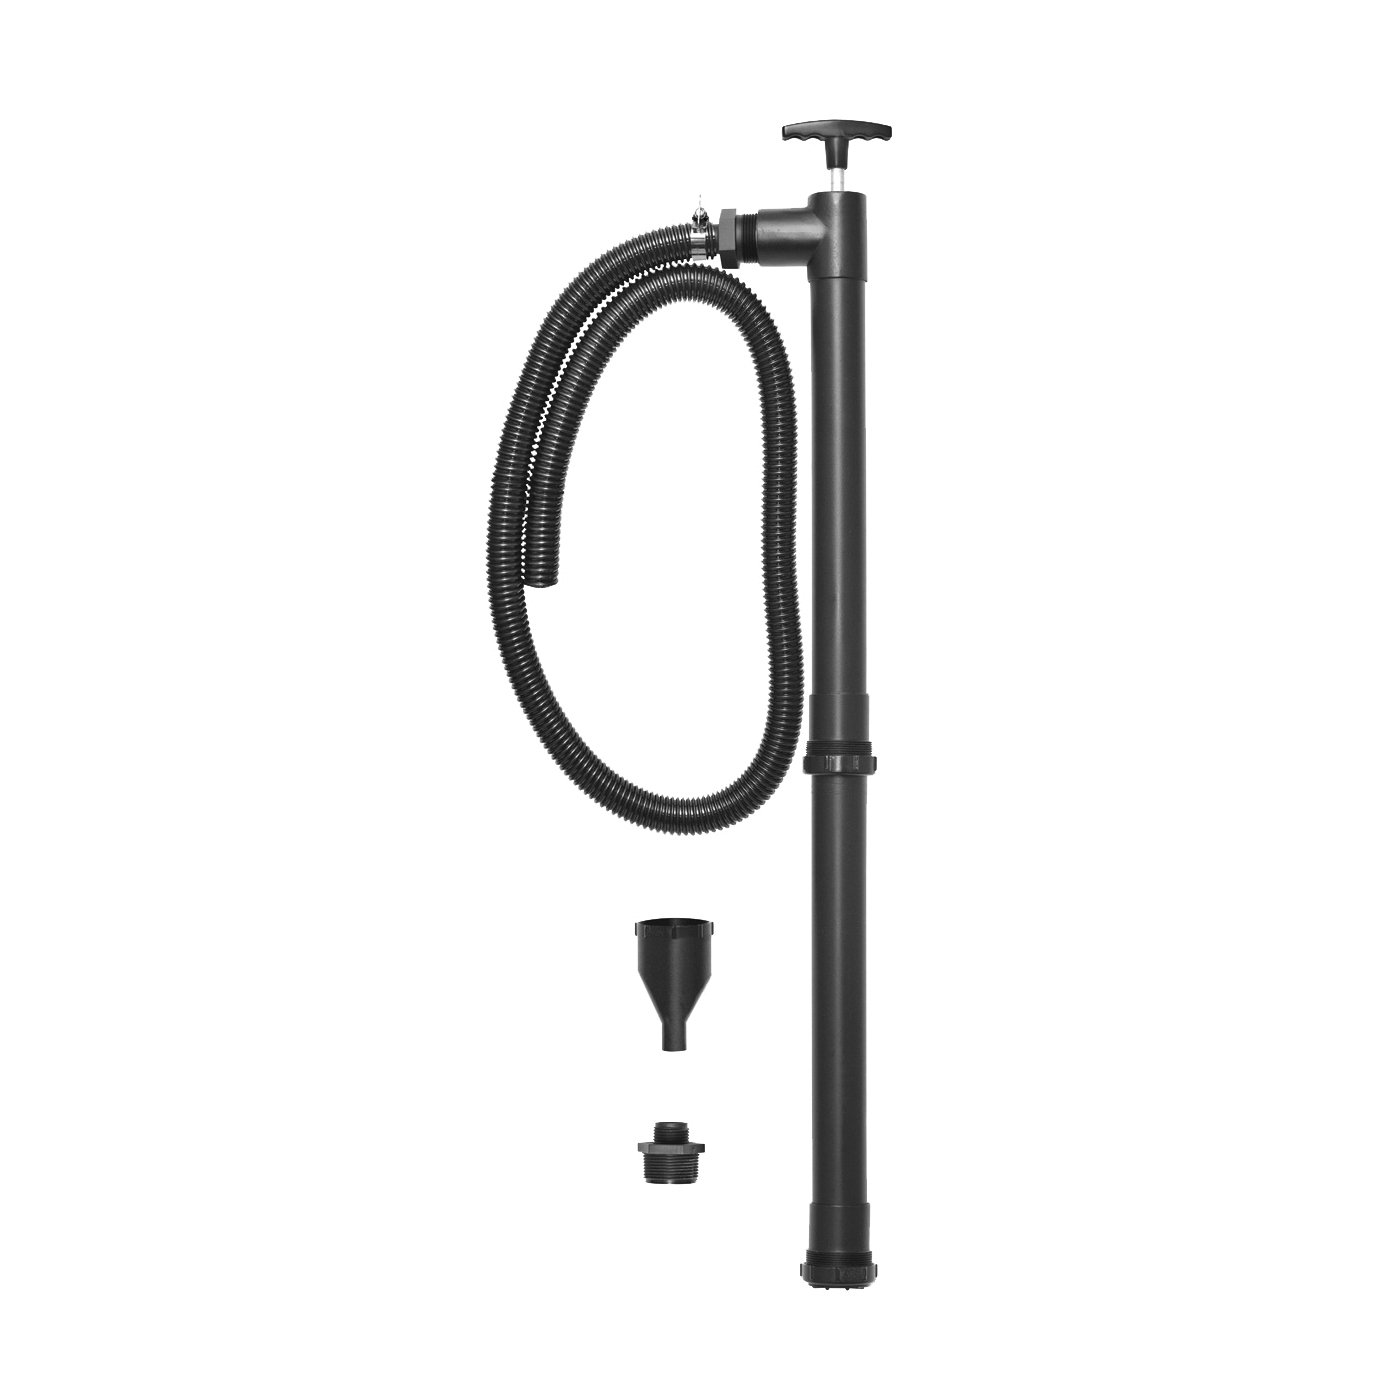 90300 Multi-Purpose Hand Pump, 1-1/2 in Outlet, Thermoplastic